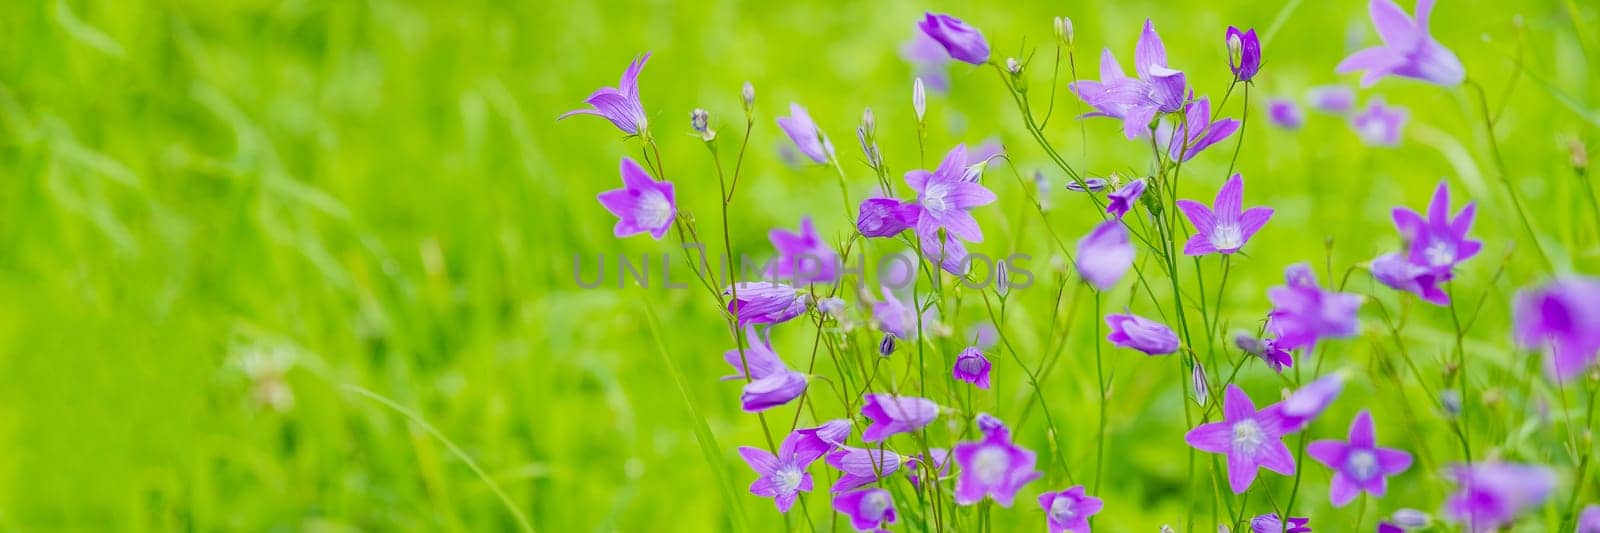 Big purple bellflower in the summer garden. Wildflowers with bright purple petals on a summer day. floral poster. Blossom campanula flower wall art poster. by YuliaYaspe1979